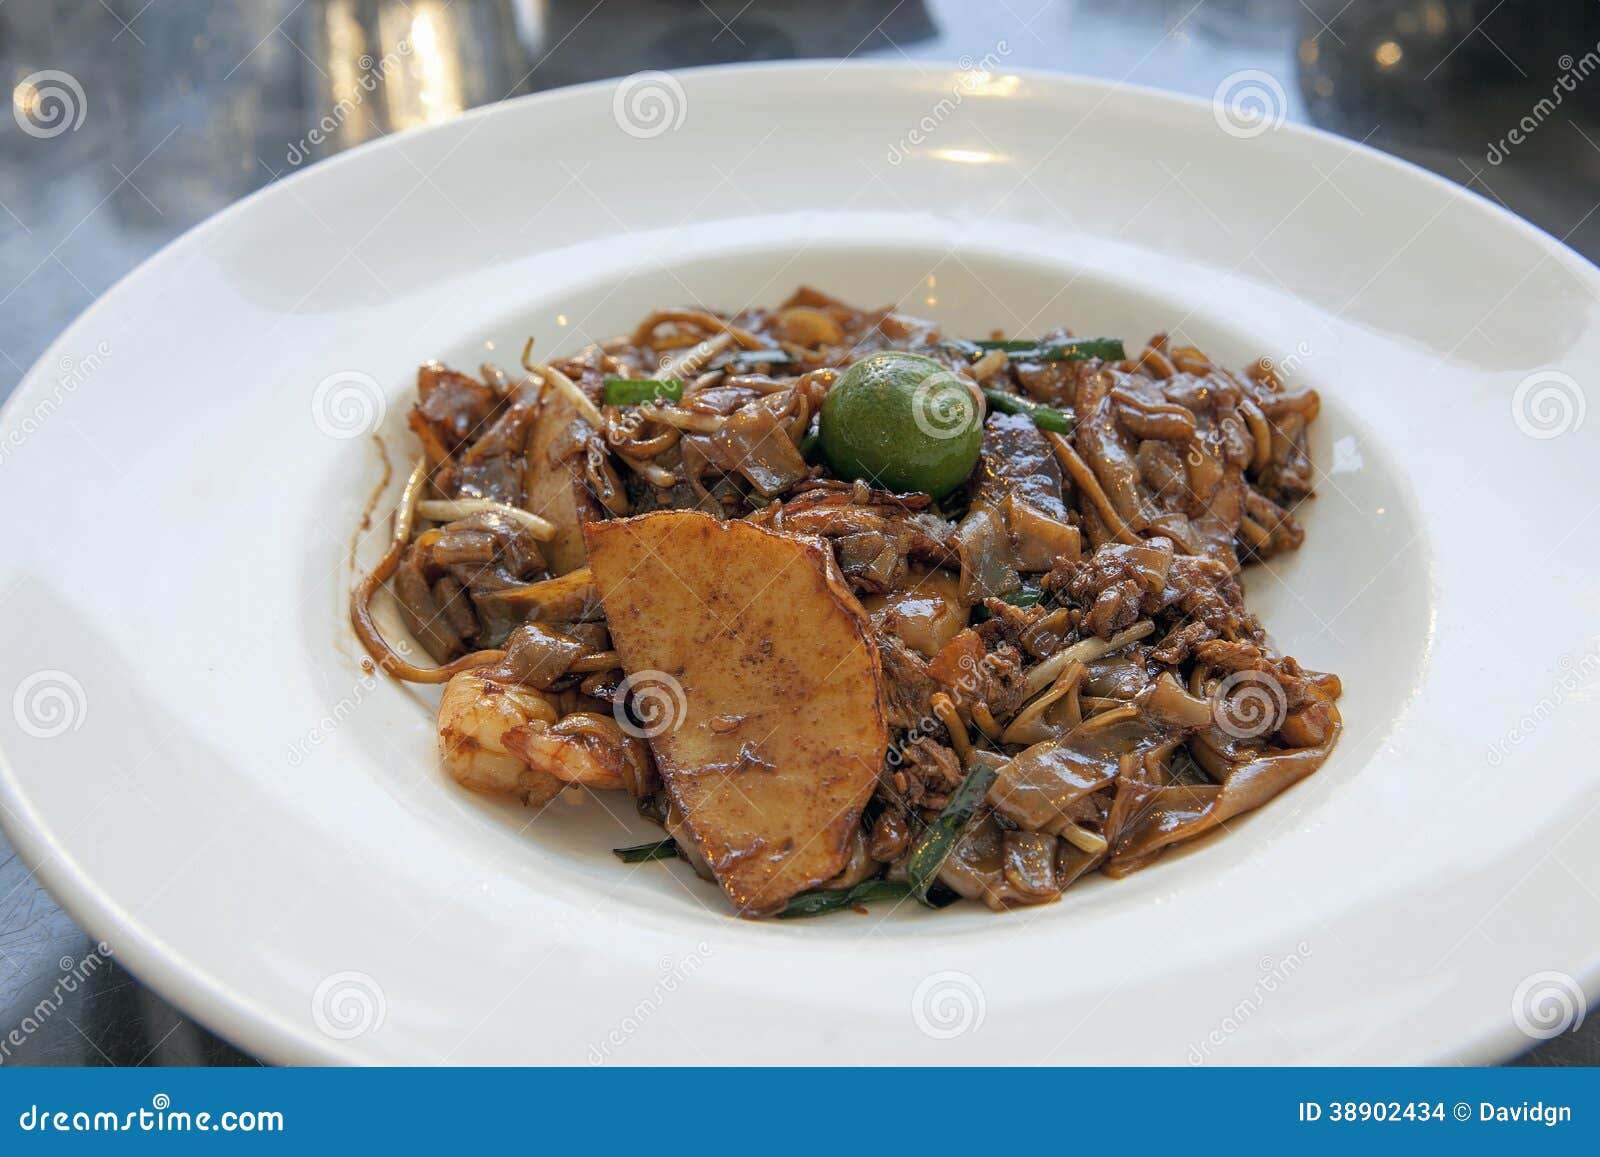 char kway teow noodle dish